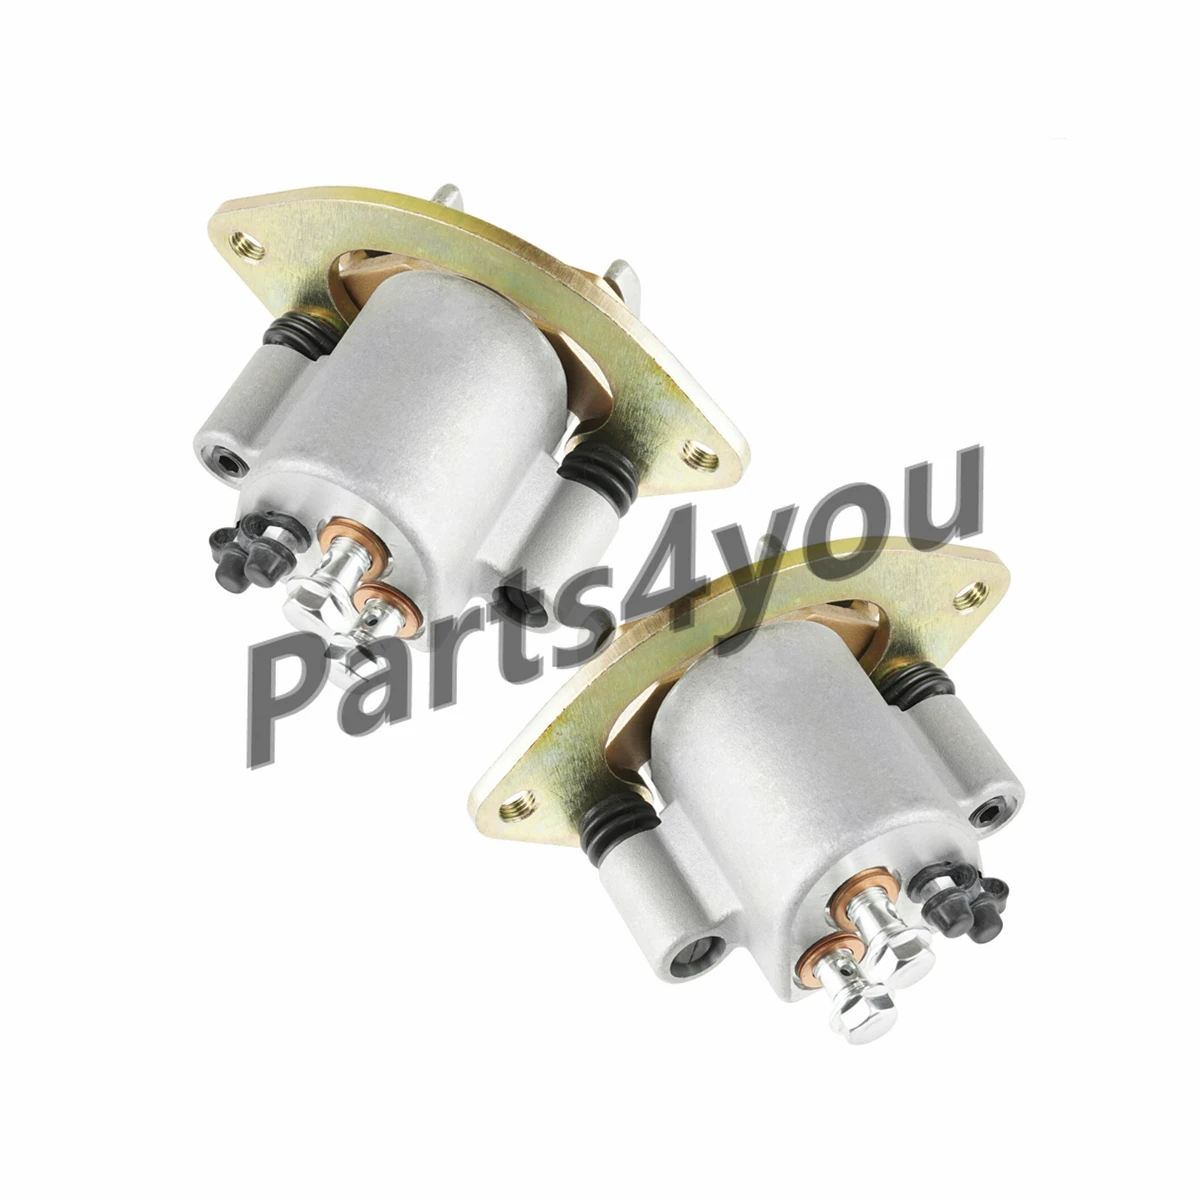 Left and Right Brake Caliper with Pads for Polaris Sportsman XP 1000 Scrambler XP 1000 Sportsman 550 570 850 1911458 1911459